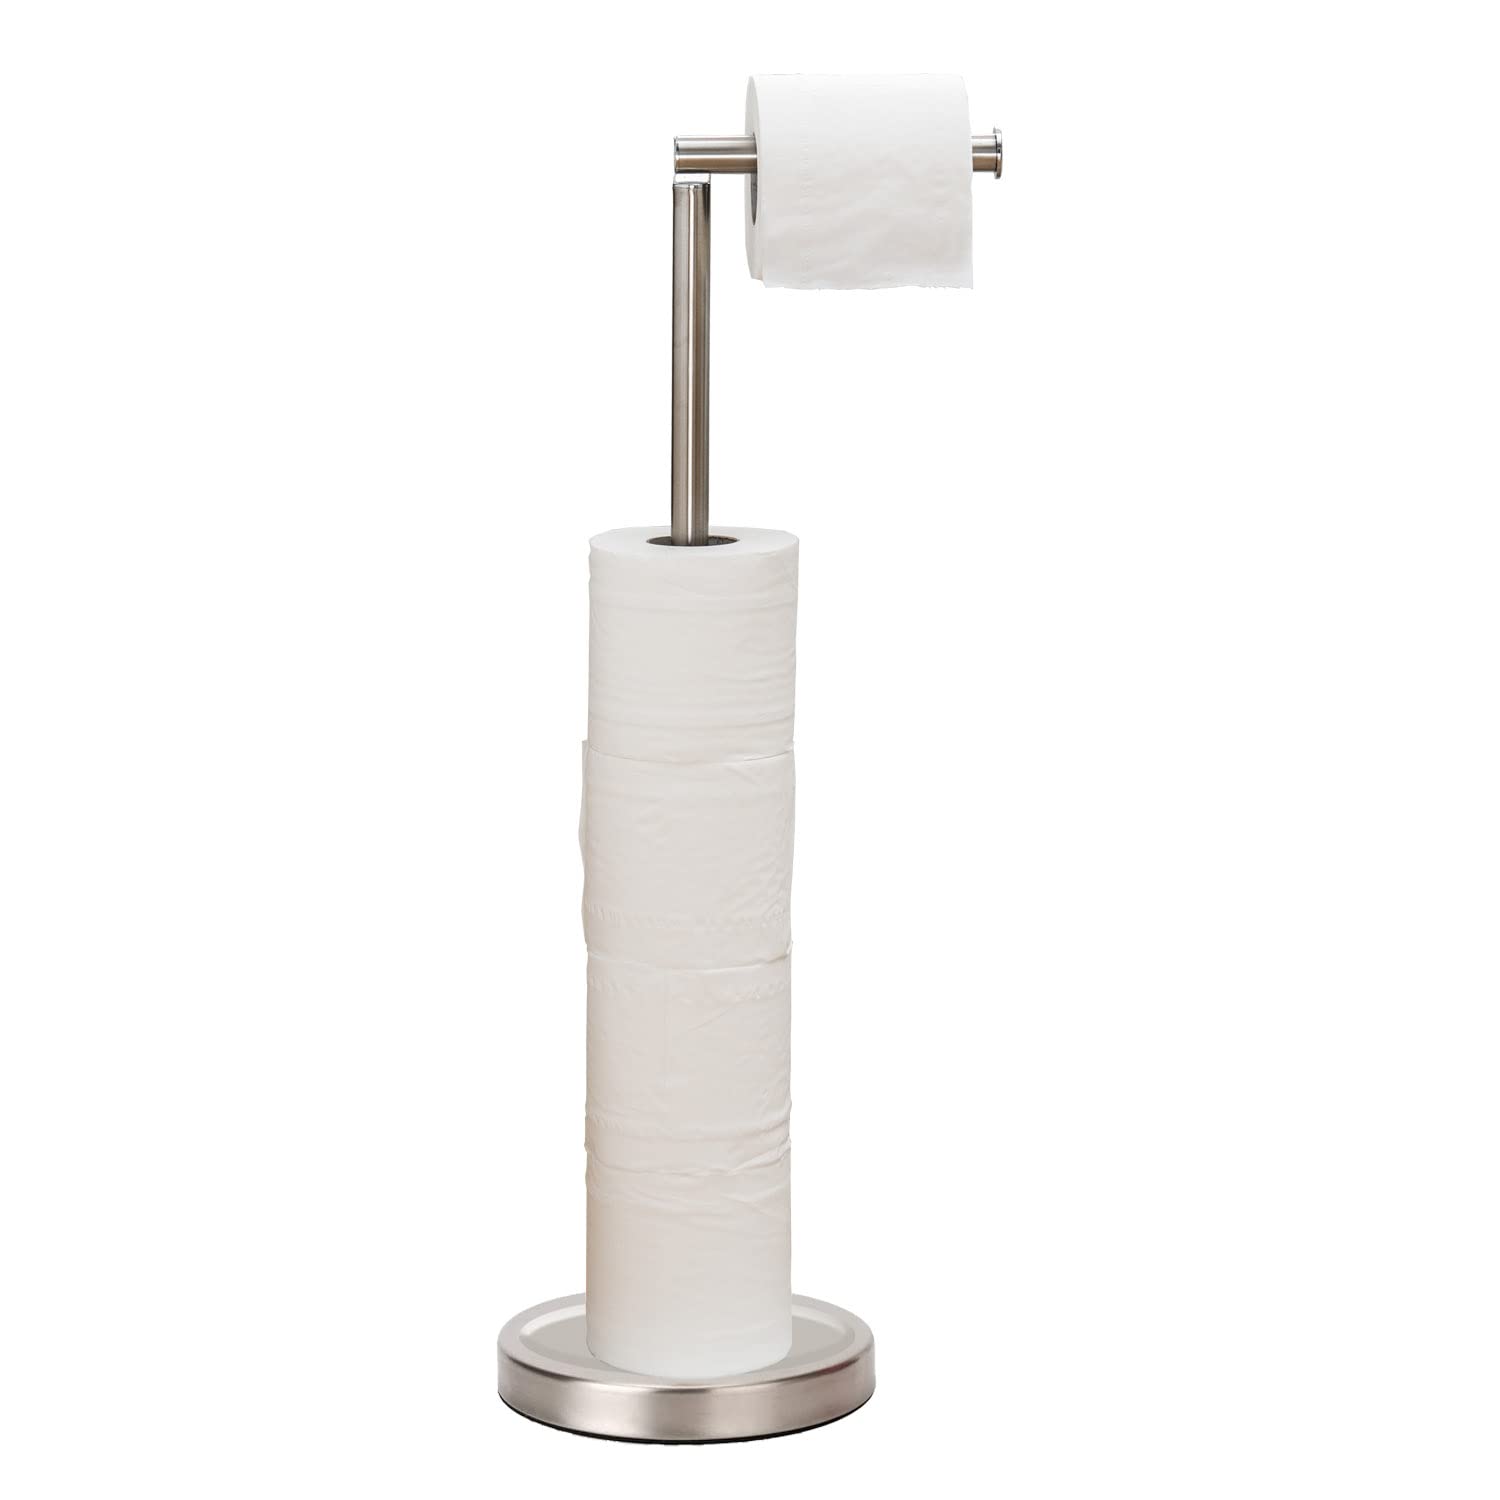 BWE Brushed Nickel Freestanding Double Post Toilet Paper Holder with Storage  in the Toilet Paper Holders department at